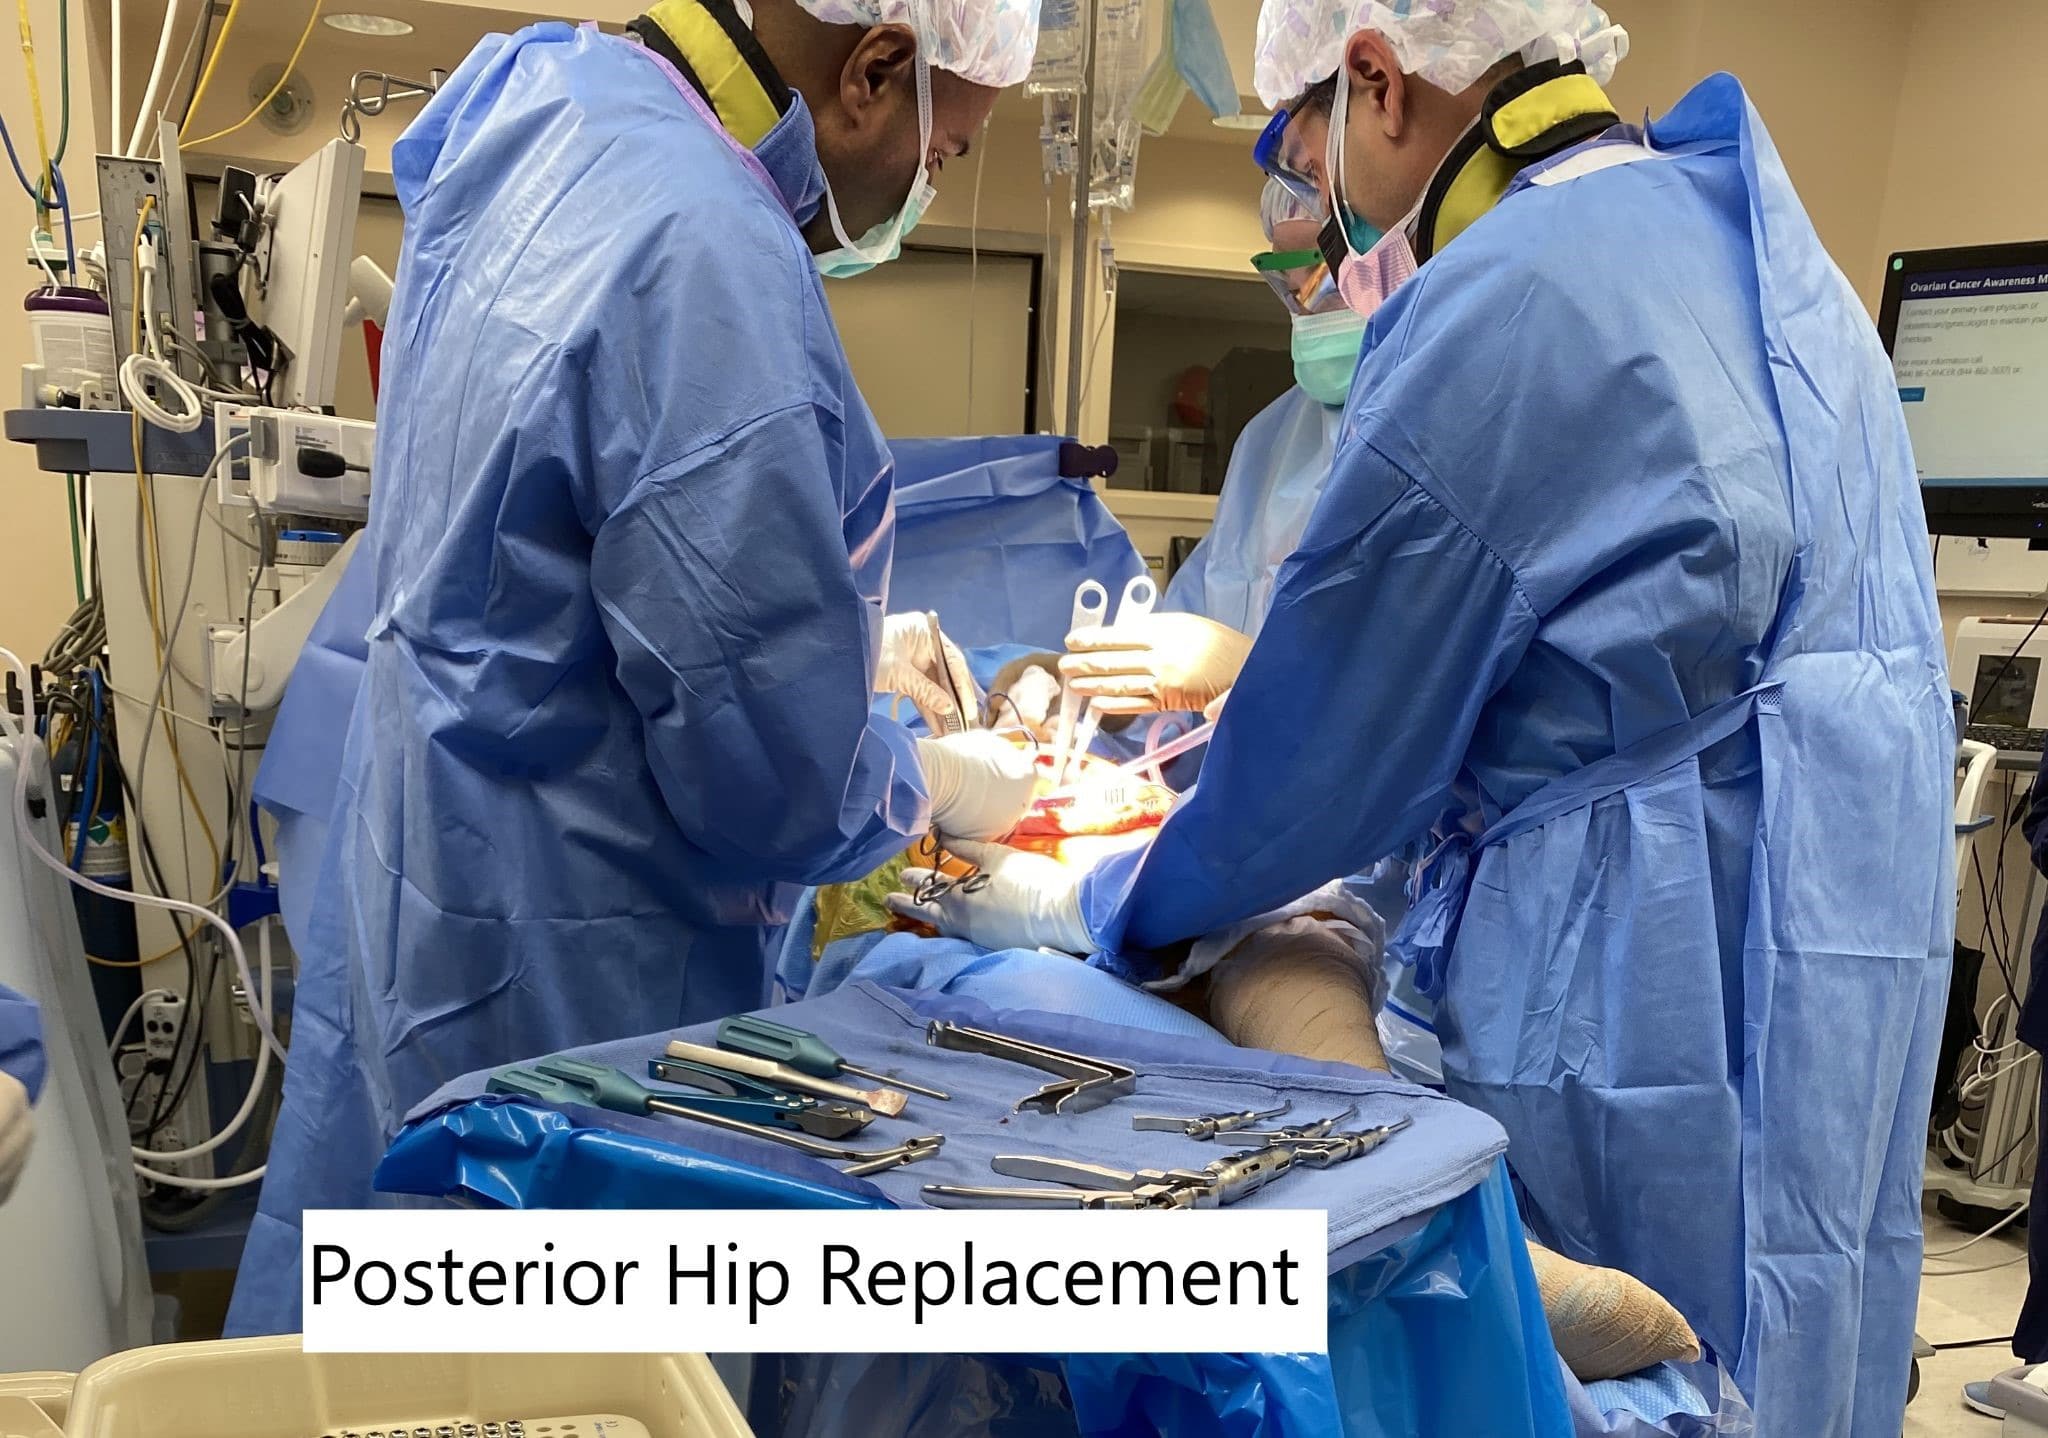 Intraoperative image showing posterior hip replacement.